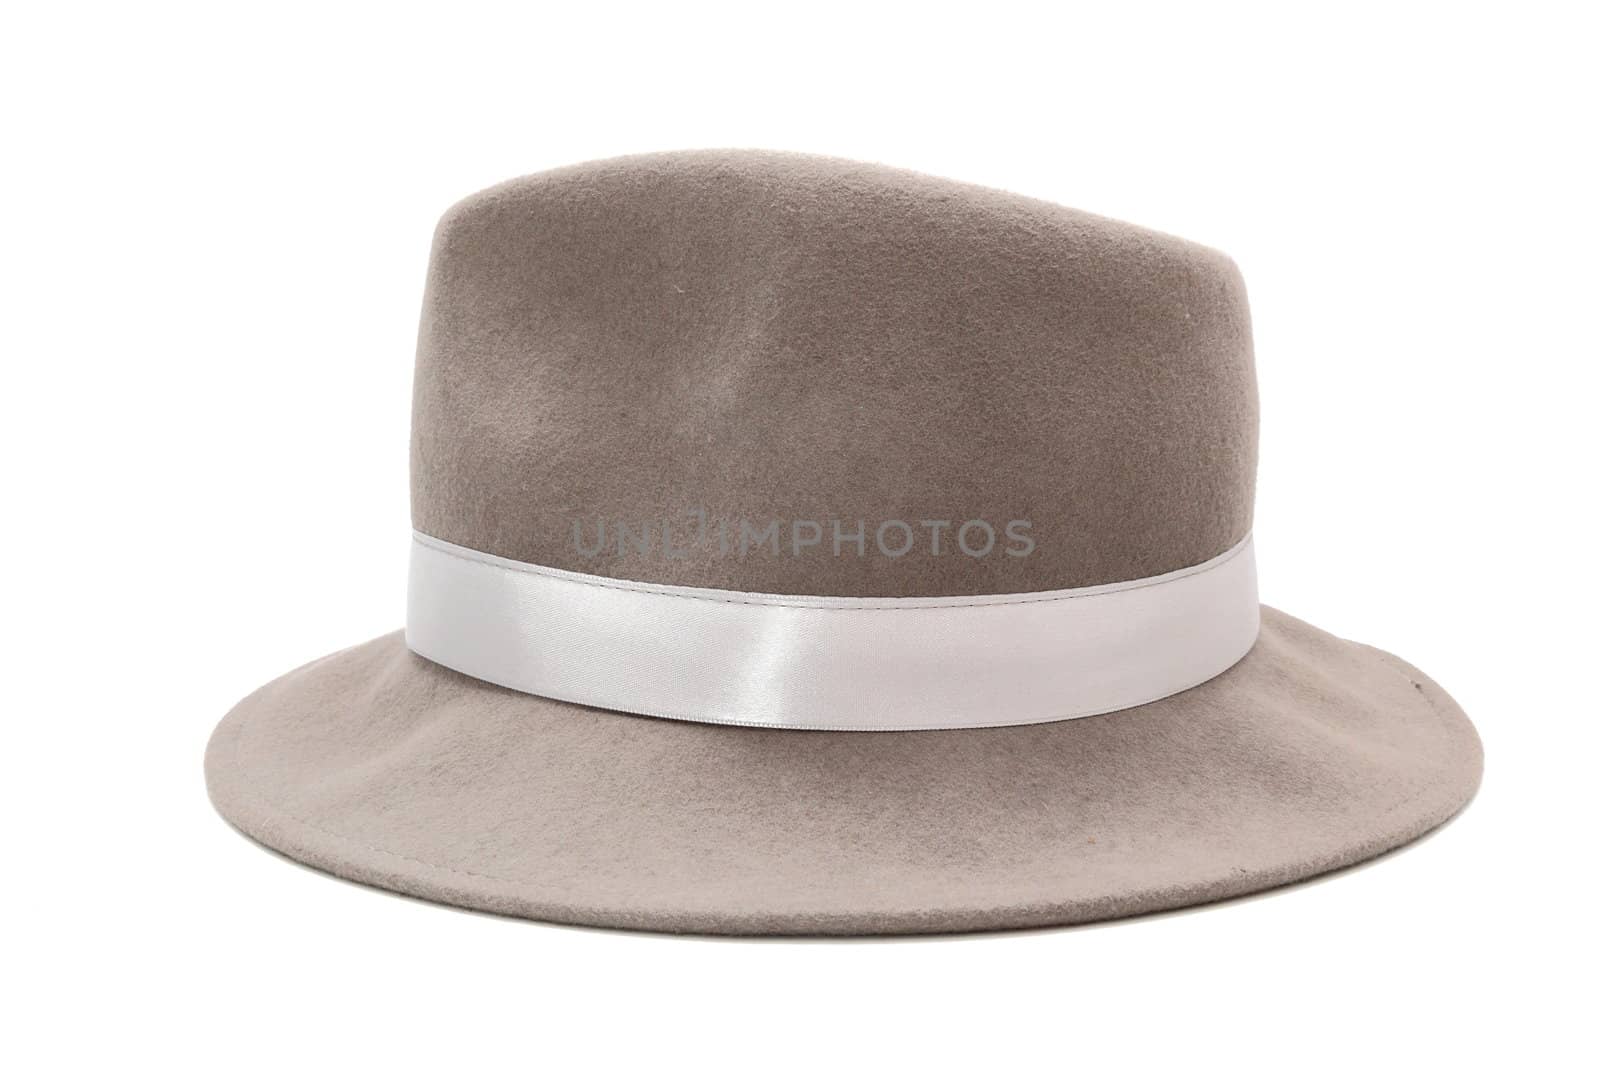 gray hat by taviphoto